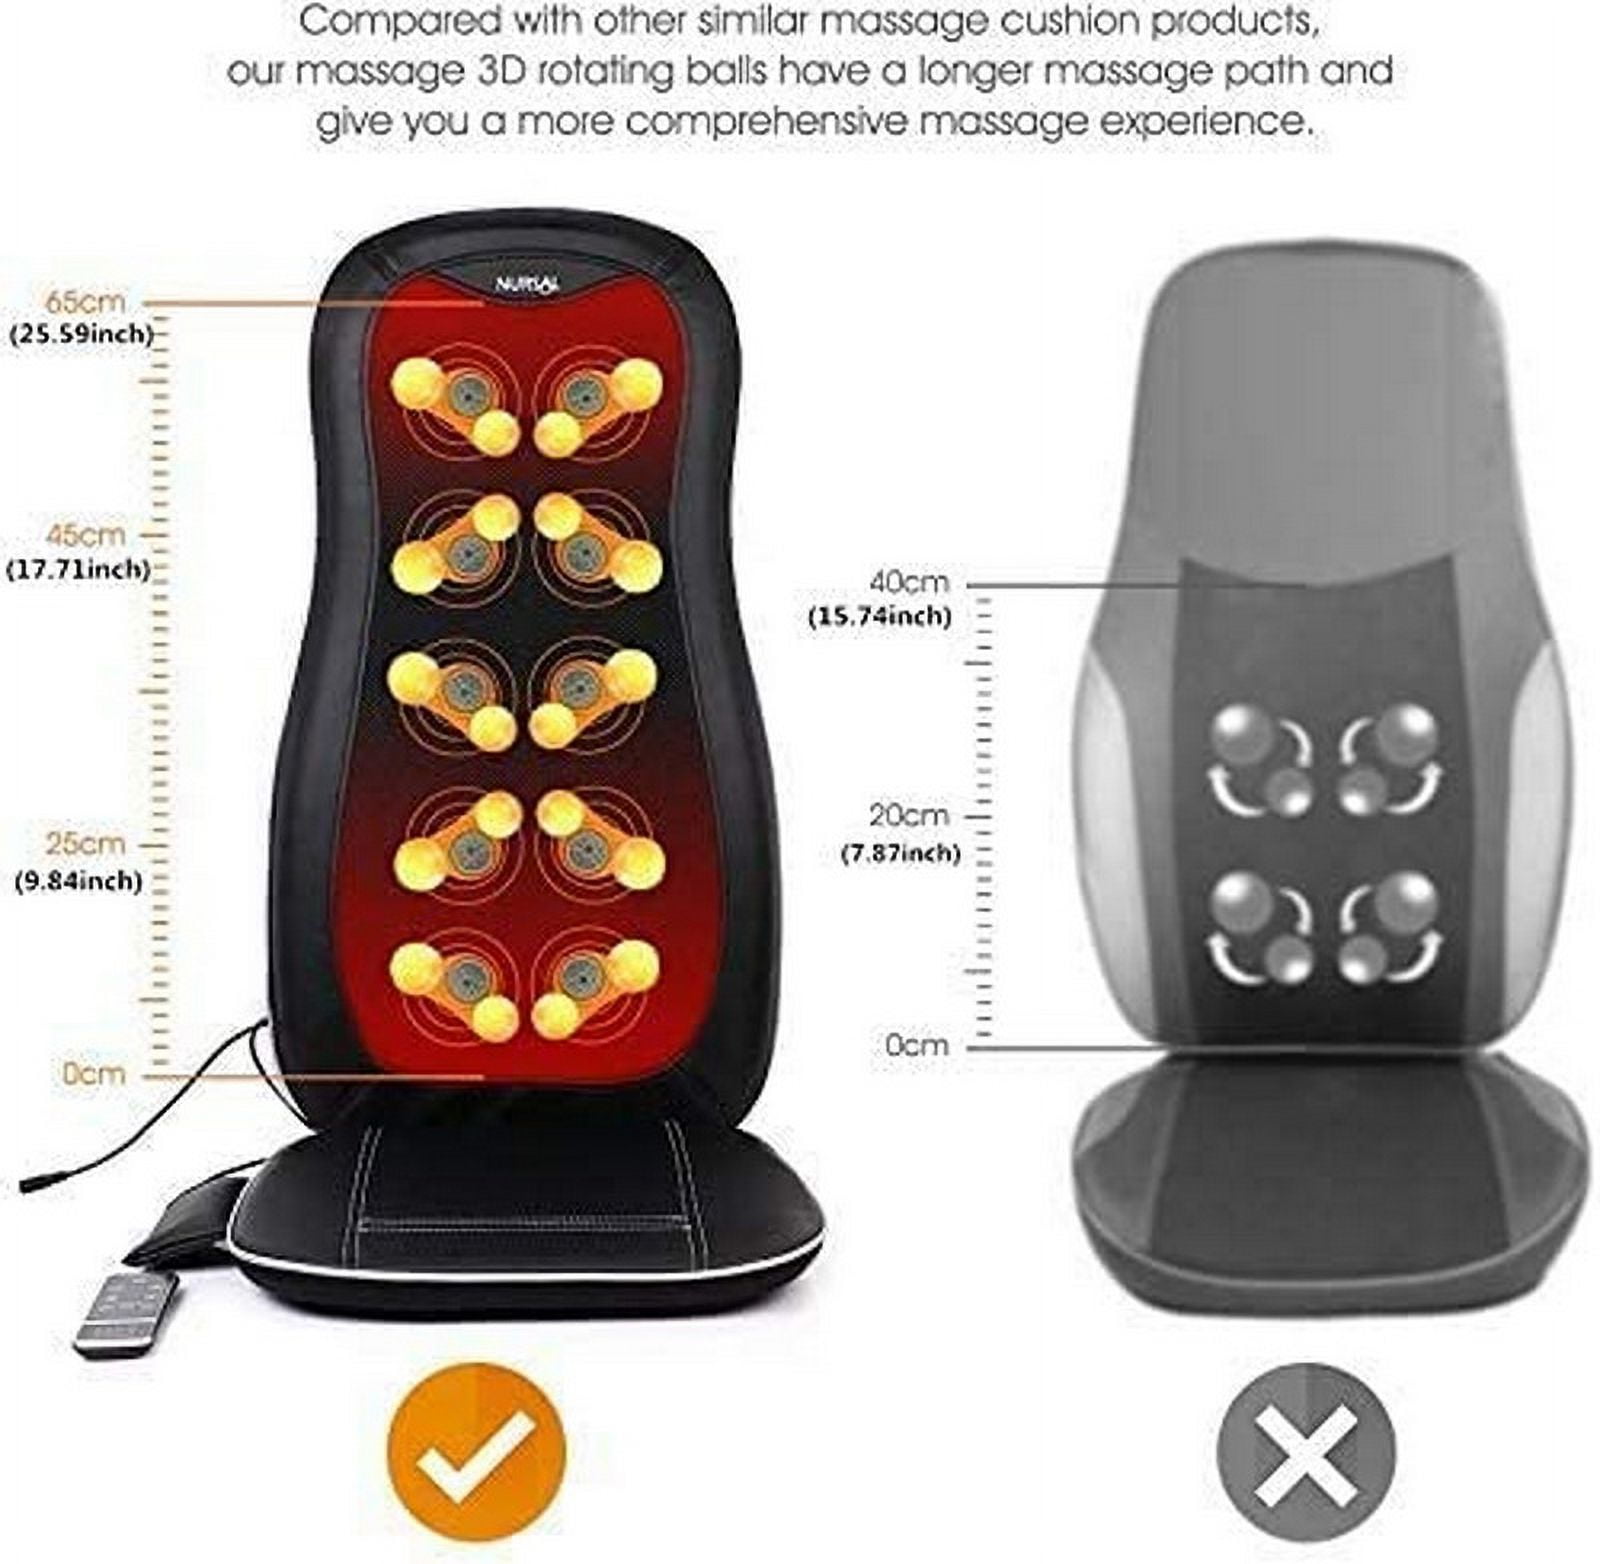 NURSAL Massage Cushion with Heat & Vibration, Deep Kneading, Pressing &  Rolling Back Massager Chair Pad - Upper-Lower Back, Waist, Hips, Pinpoint  Precise Spots for Home, Office & Car Use